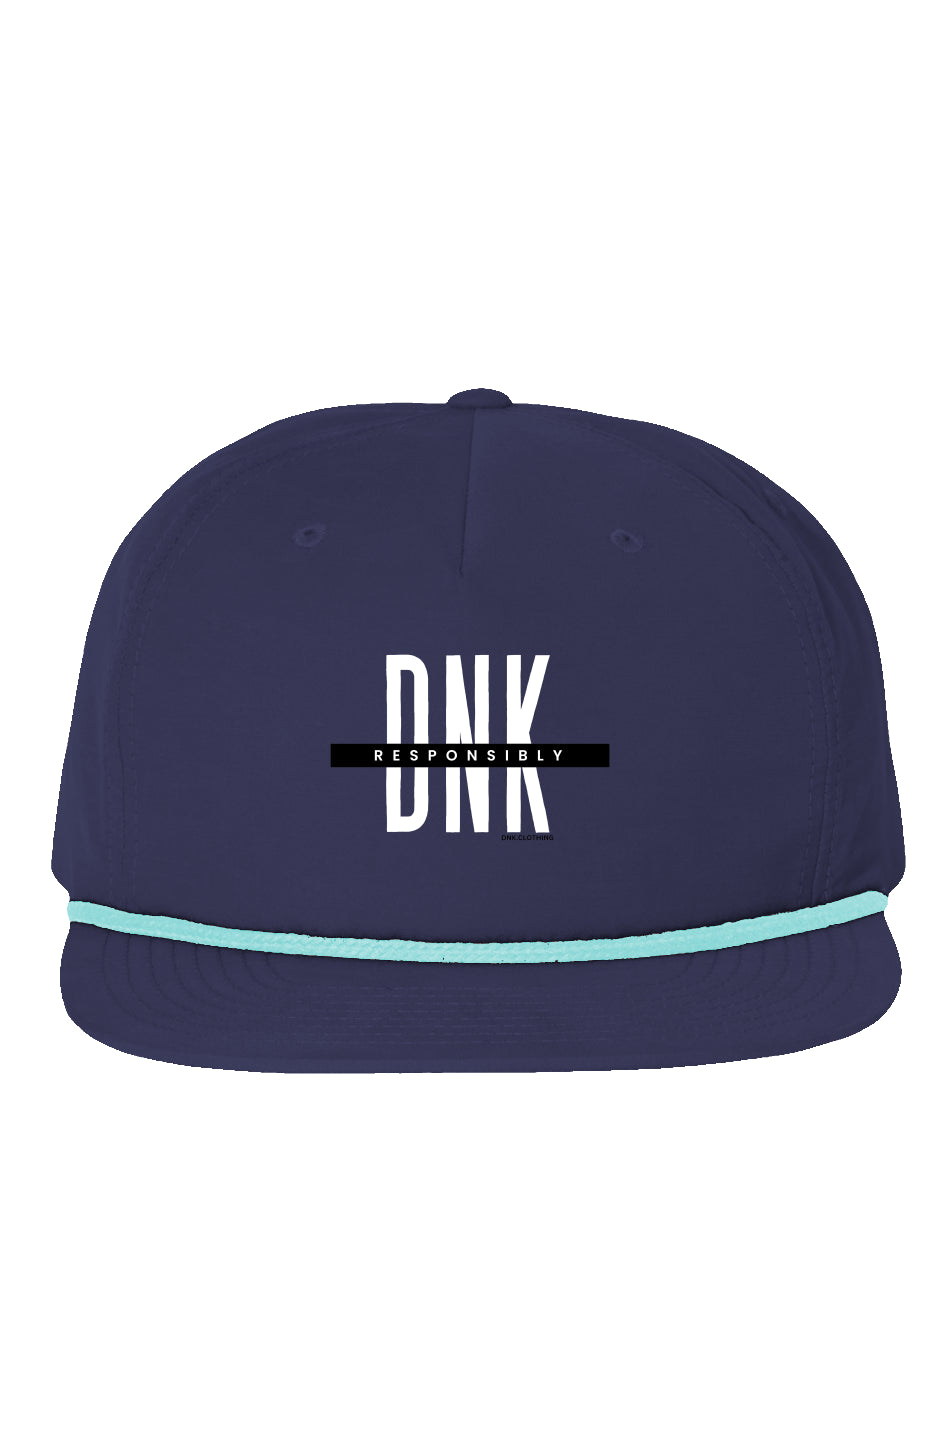 DNK Responsibly Hat